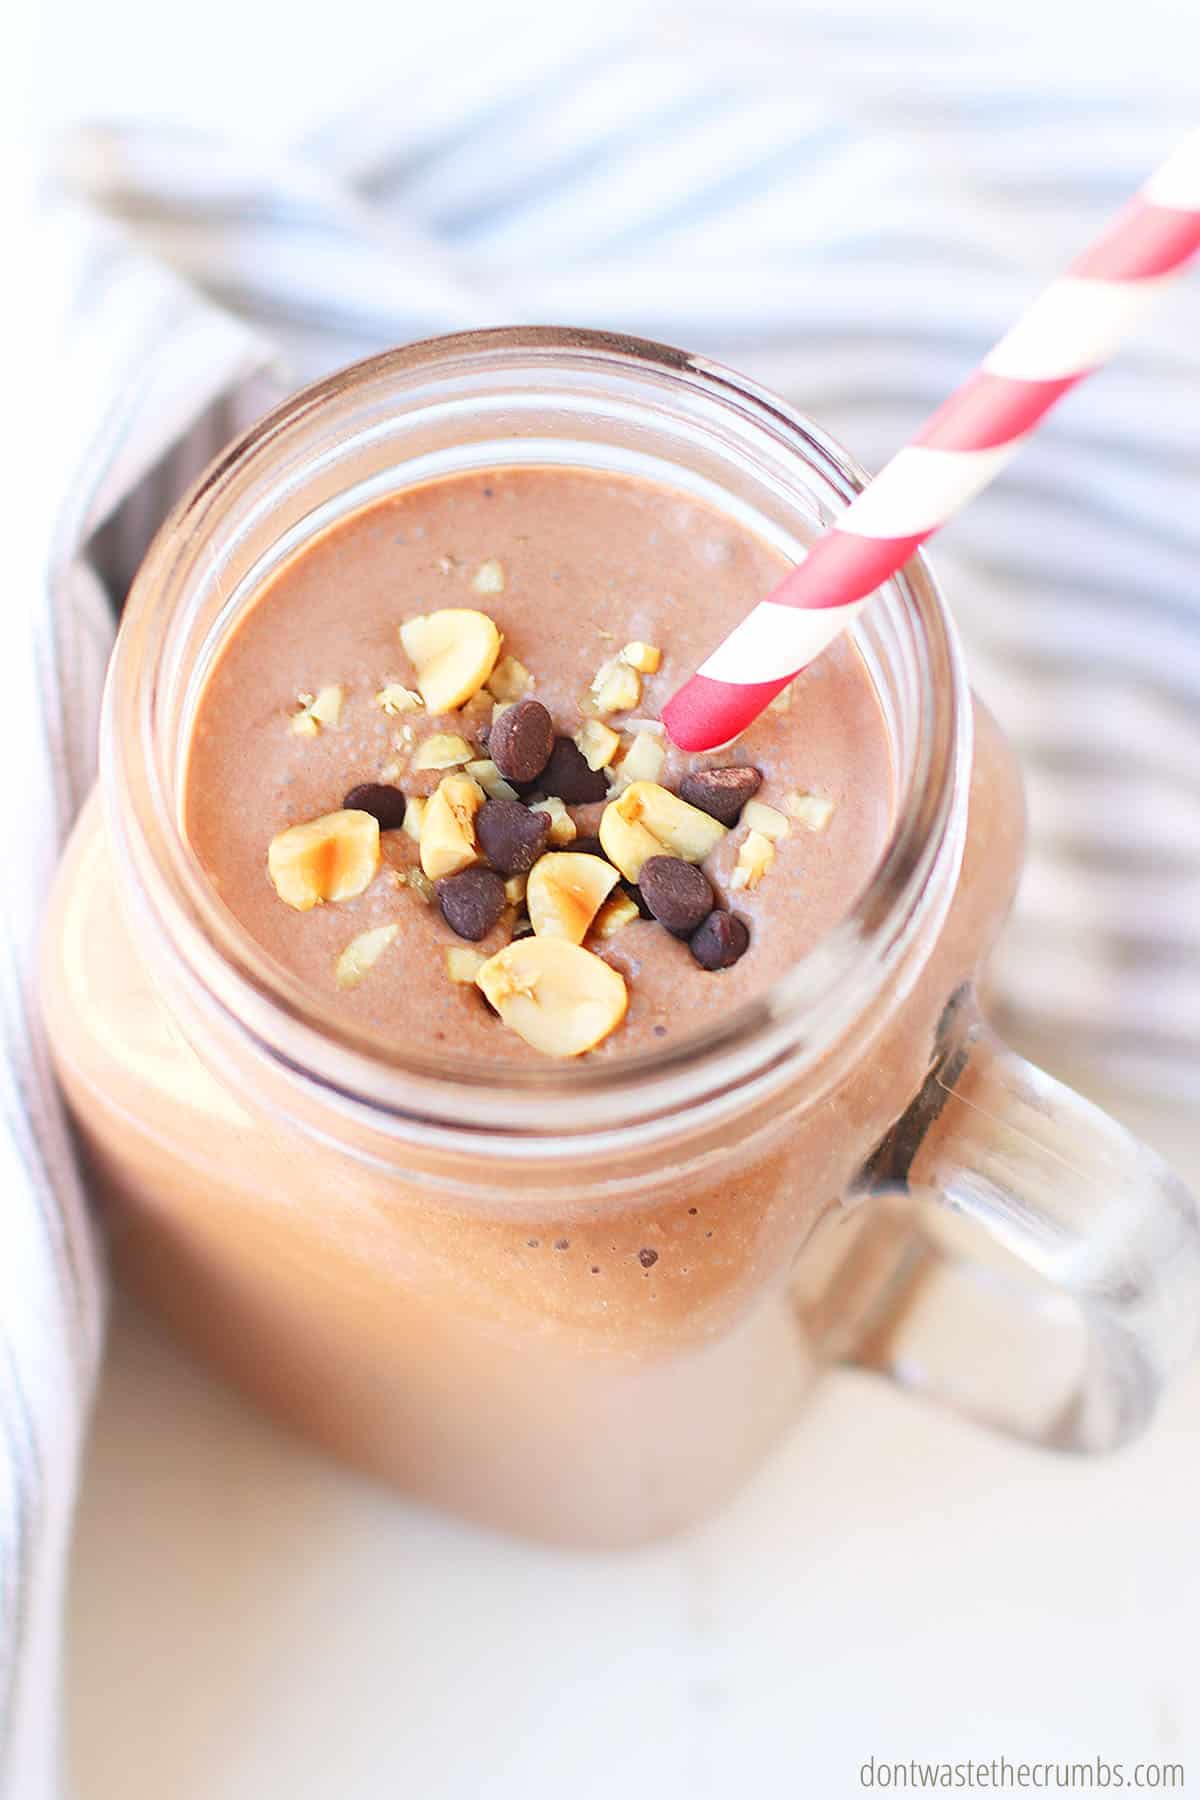 Looking down at the top of a chocolate peanut butter smoothie in a glass jar with a red and white striped straw. Garnished with chopped peanuts and chocolate chips.